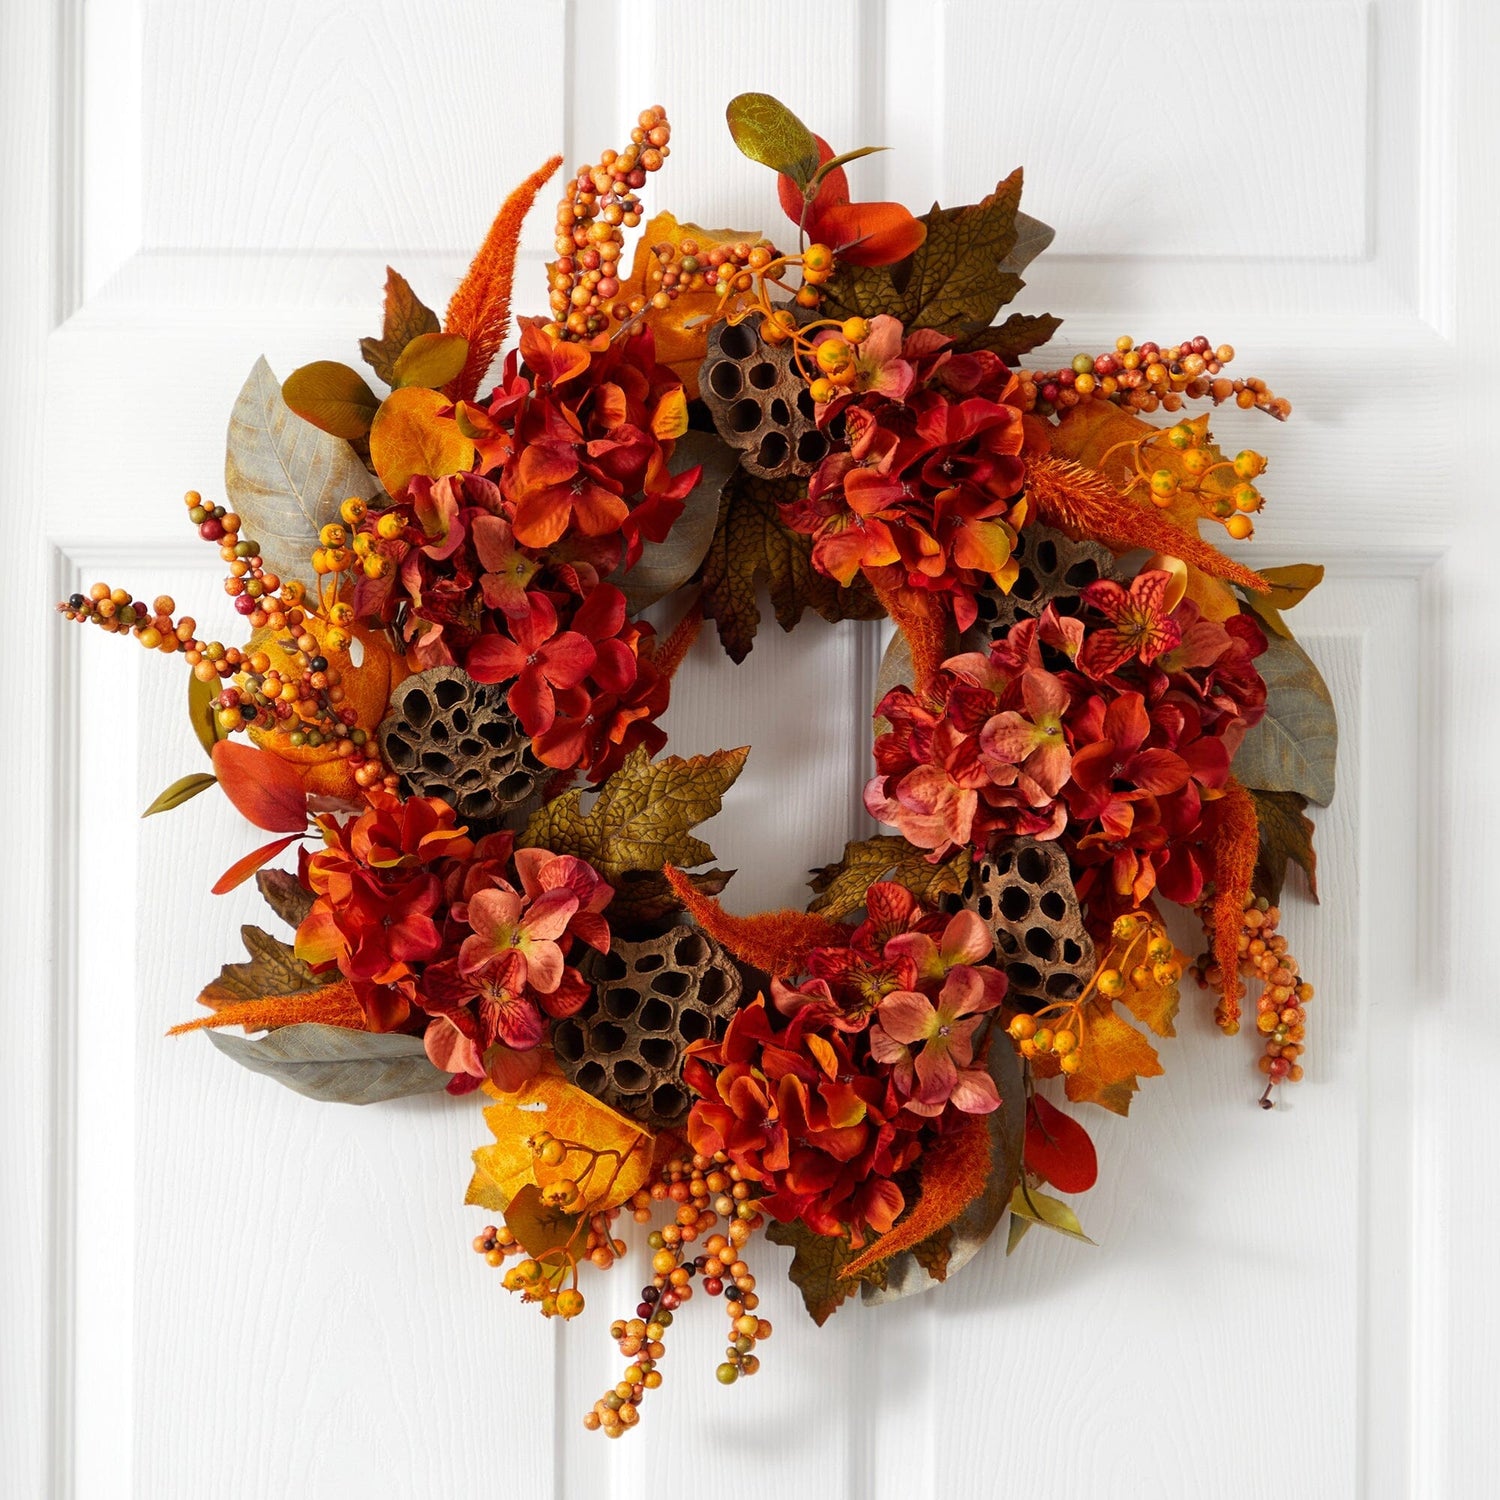 24” Fall Hydrangea, Lotus and Berries Artificial Wreath